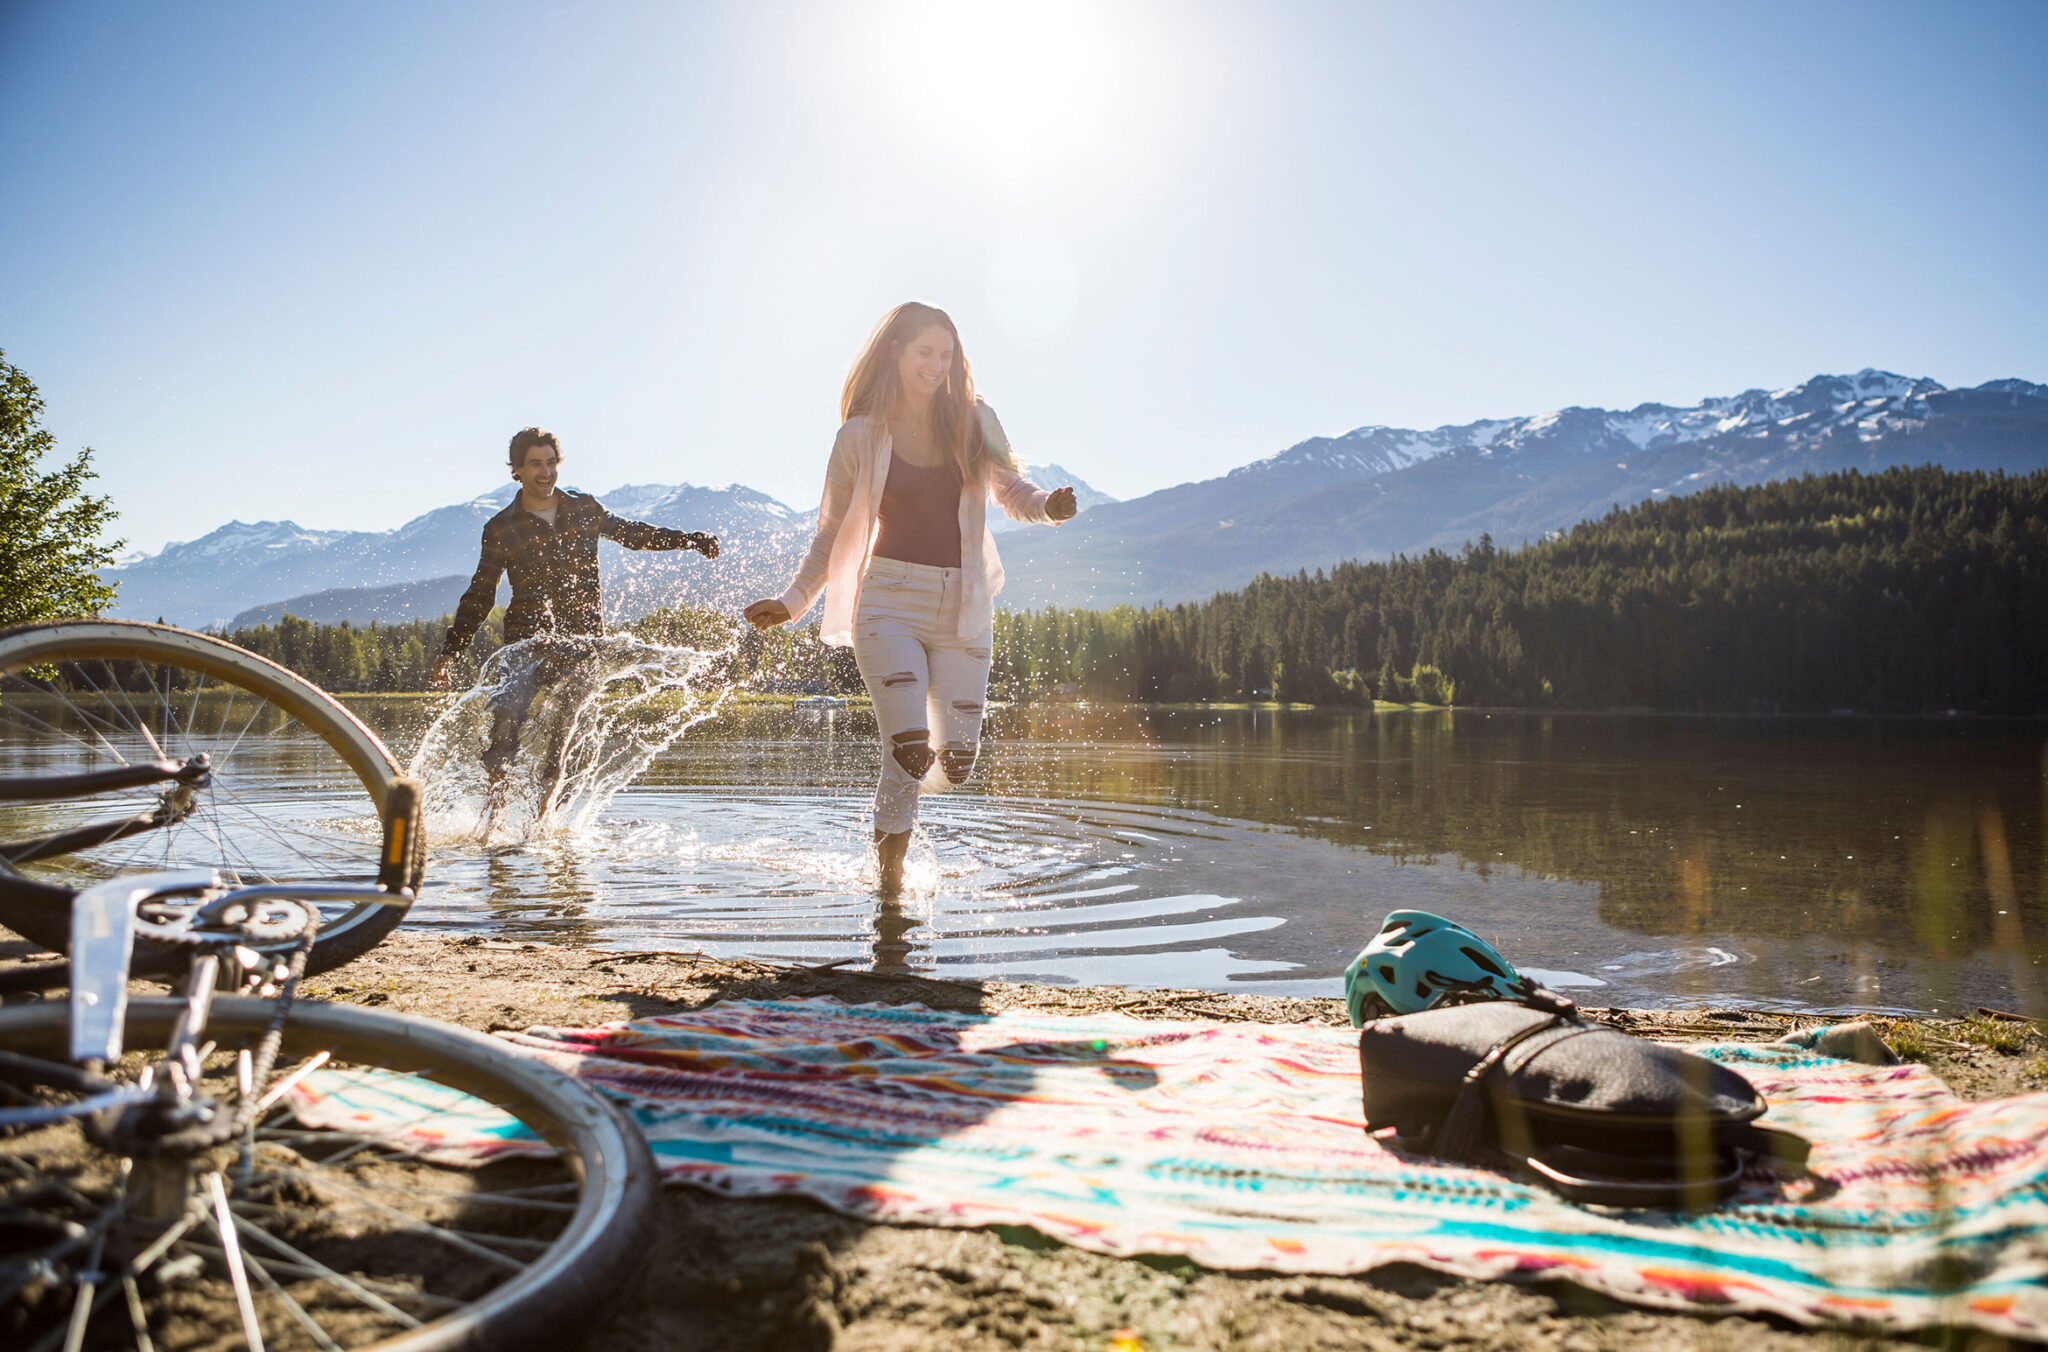 A man and woman splash through the lake water on a sunny spring day in Whistler.